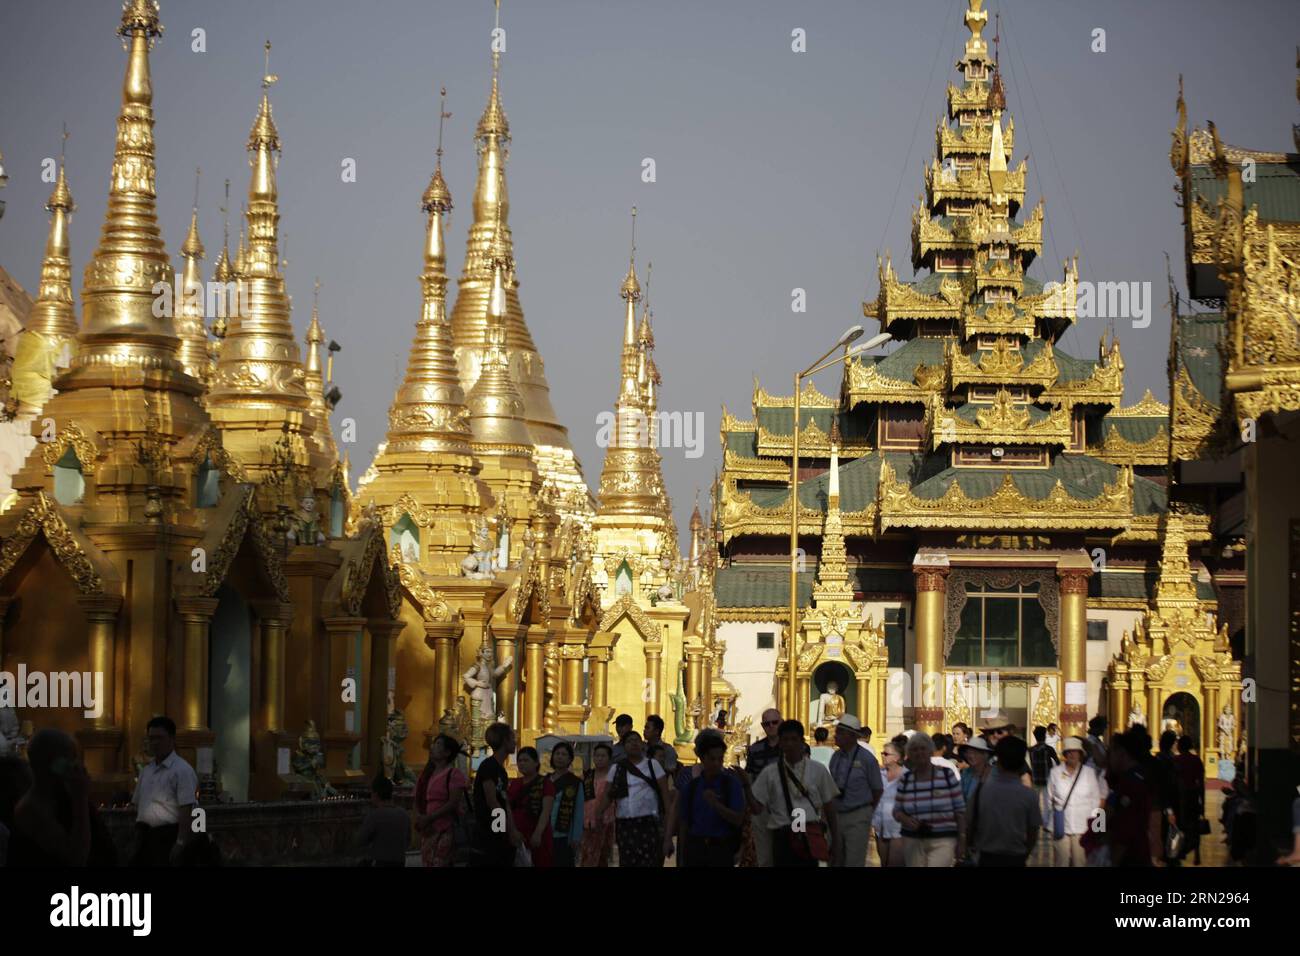 YANGON, Feb. 17, 2015 -- People visit the Shwedagon pagoda in Yangon, Myanmar, Feb. 17, 2015. Shwedagon Pagoda is a repository of the best of Myanmar s heritages -- architecture, sculpture and arts. It consists of hundreds of colorful temples, stupas and statues that reflect architectural styles spanning almost 2,500 years. ) MYANMAR-YANGON-SHWEDAGON PAGODA UxAung PUBLICATIONxNOTxINxCHN   Yangon Feb 17 2015 Celebrities Visit The Shwedagon Pagoda in Yangon Myanmar Feb 17 2015 Shwedagon Pagoda IS a repository of The Best of Myanmar S heritage Architecture Sculpture and Arts IT consists of hundre Stock Photo